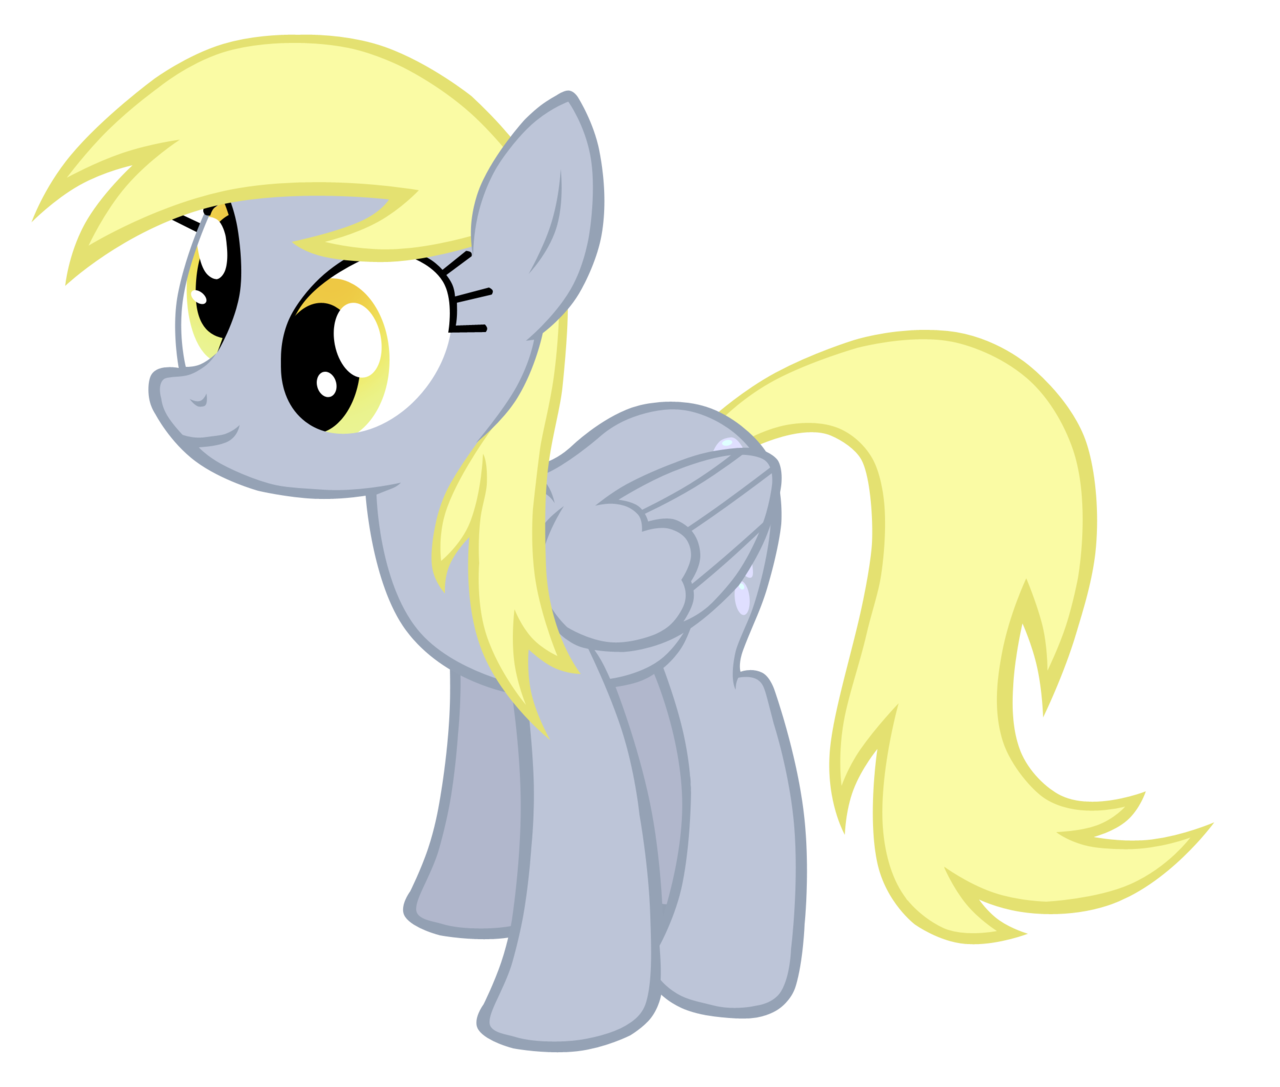 derpy_hooves_by_makintosh91-d4rnoom.png